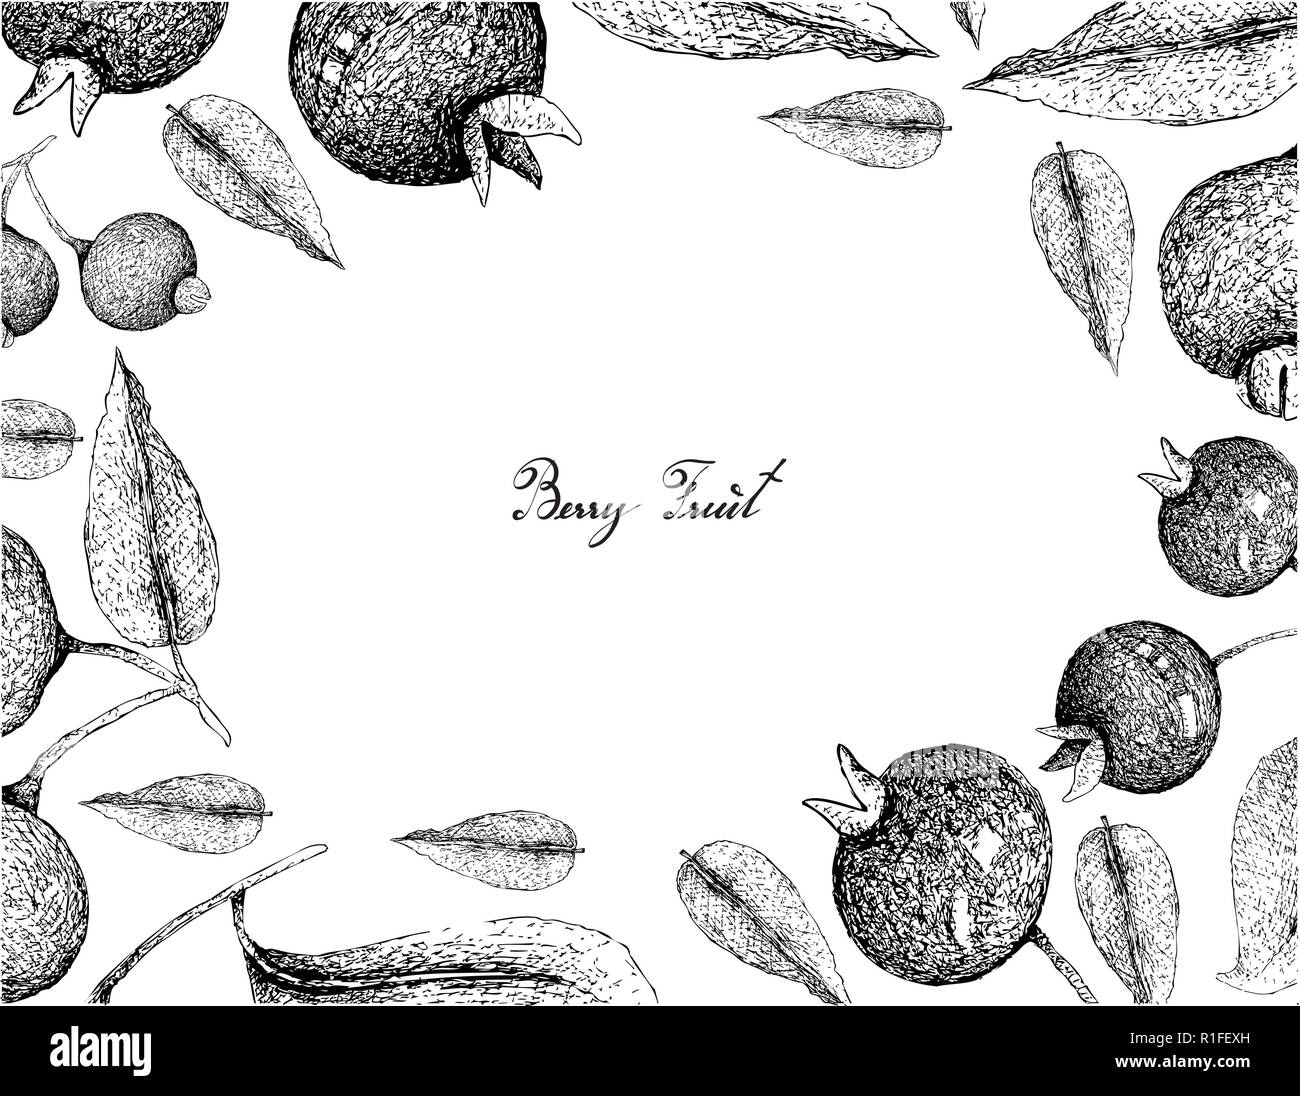 Berry Fruit, Illustration Frame of Hand Drawn Sketch of Fresh Grumichama Cherries or Eugenia Brasiliensis and Guabiju or Myrcianthes Pungens Fruits Is Stock Vector